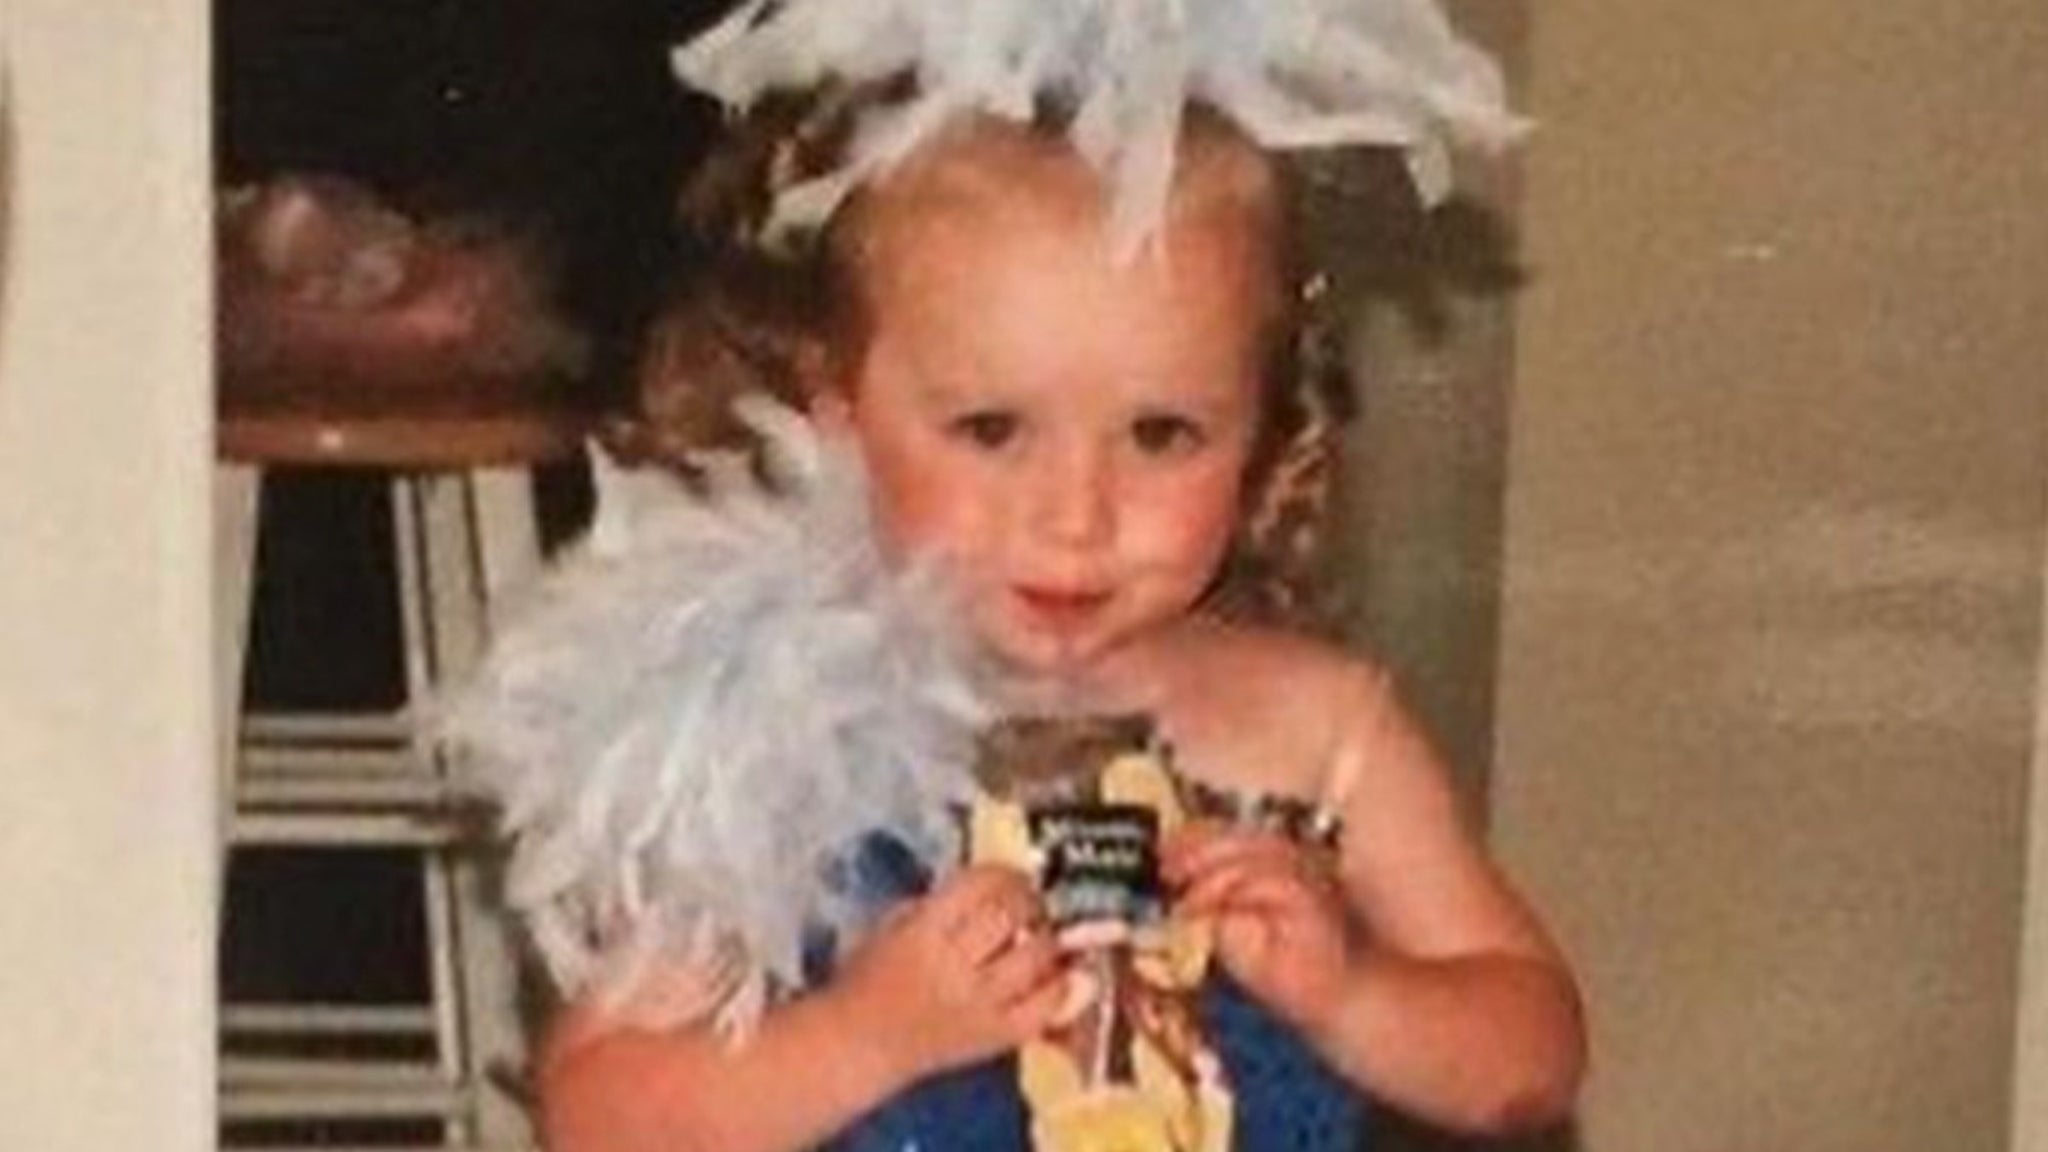 Guess who this little fairy has transformed!